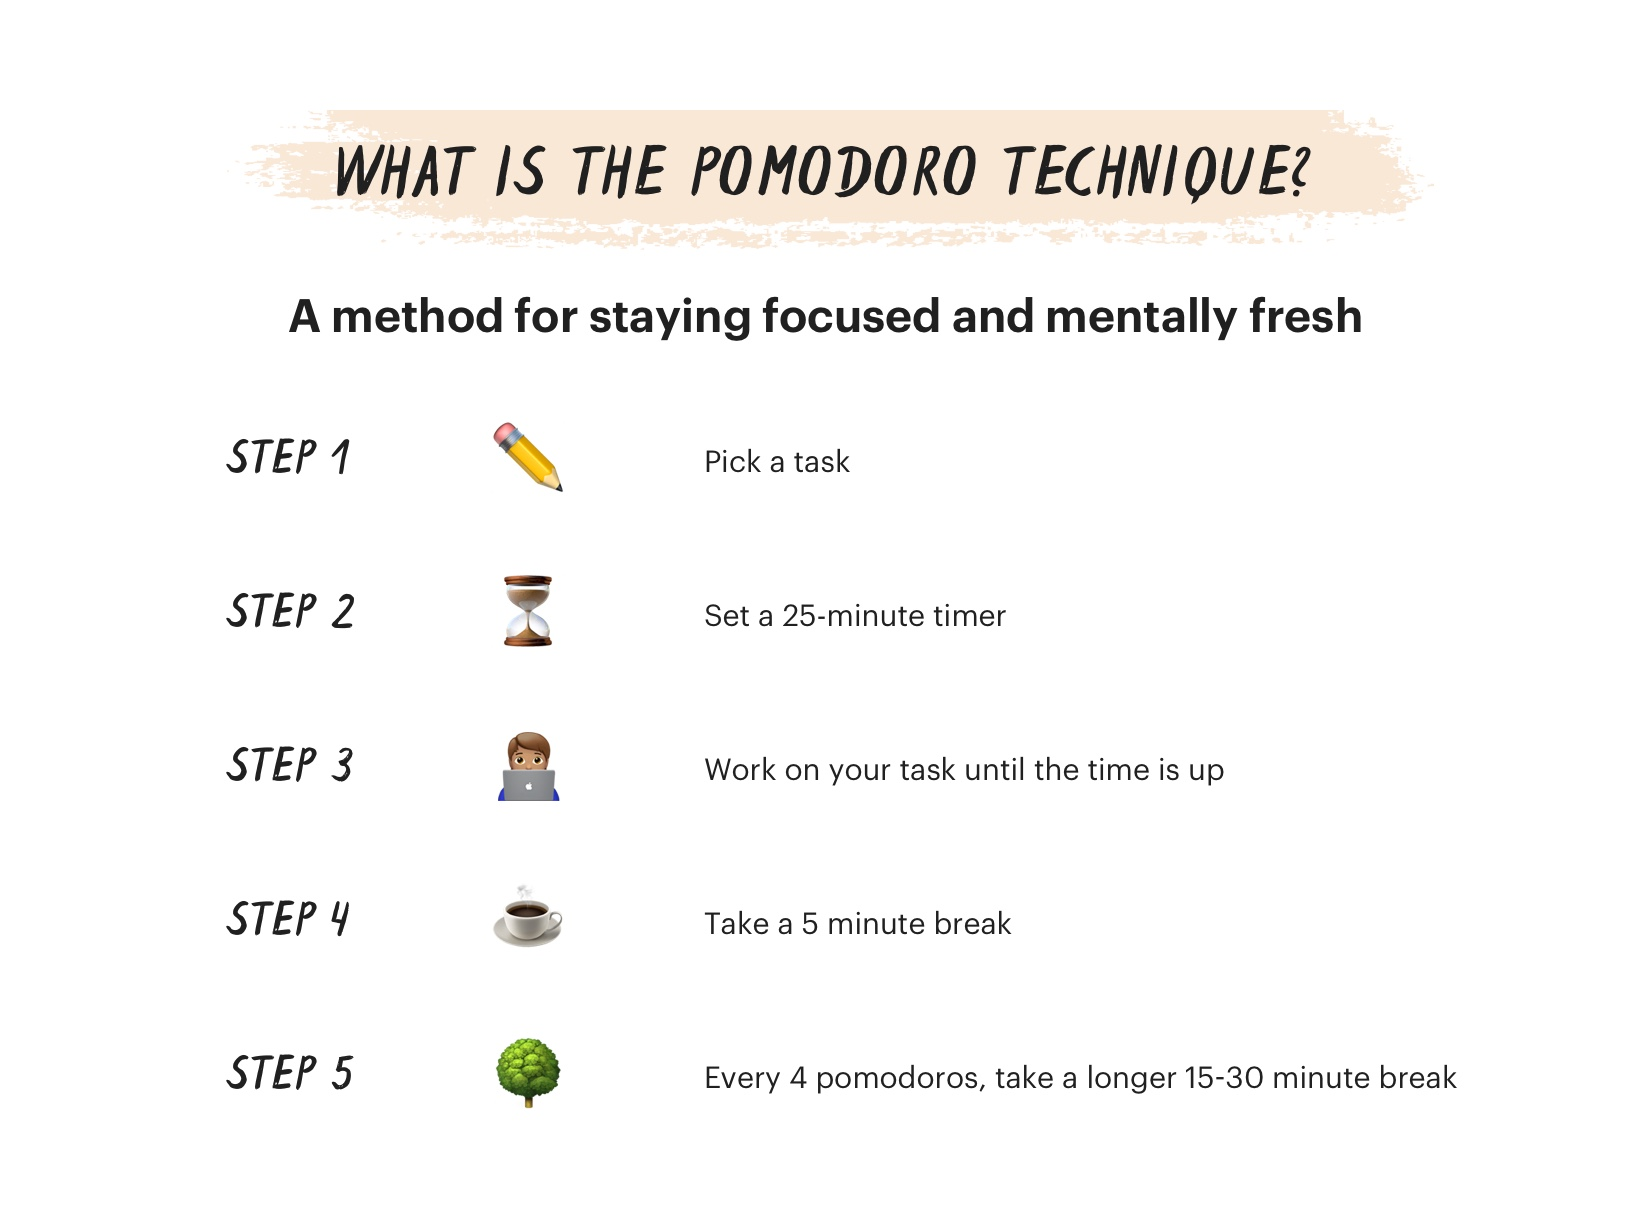 How Do You Handle Repetitive Tasks? 3. Boost your focus by using Pomodoro Technique